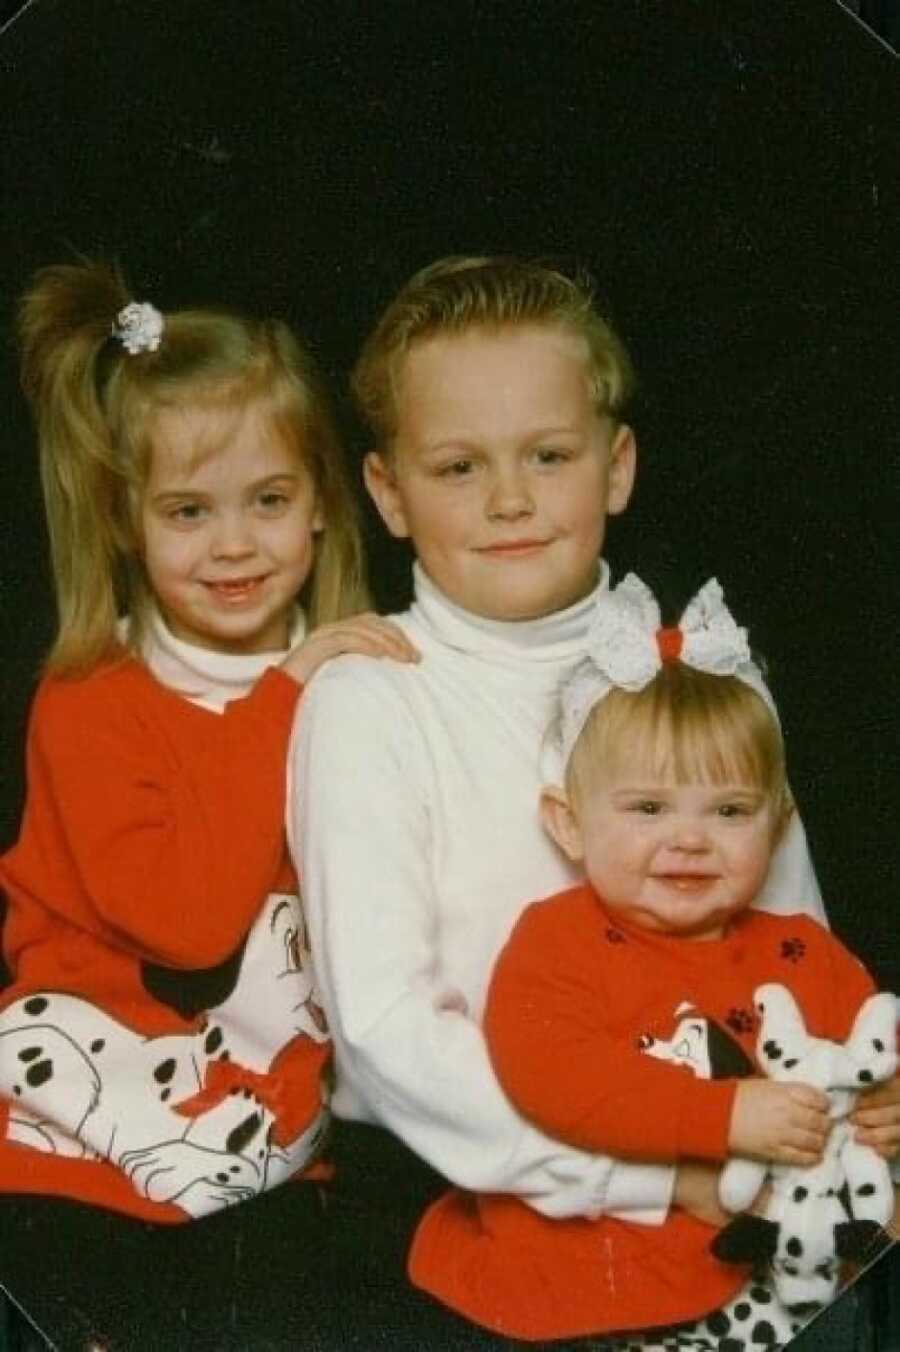 three siblings posing together for a picture